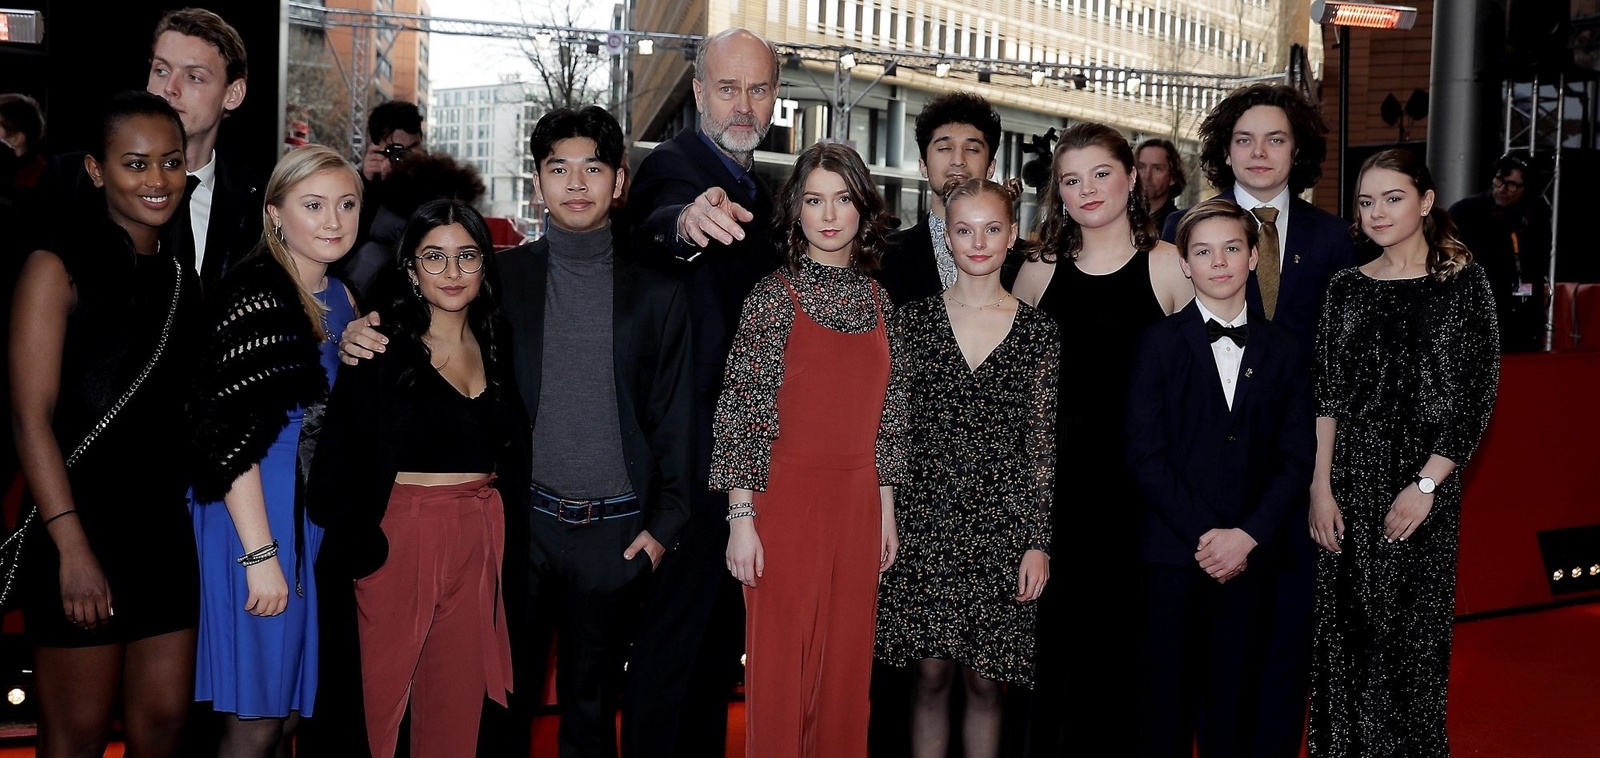 The cast of the film "Utoya 22. Juli" ( U - July 22) with director Erik Poppe, center, and actress Andrea Berntzen, center right in red, arrive for the screening of the film during the 68th edition of the International Film Festival Berlin, Berlinale, in Berlin, Germany, Monday, Feb. 19, 2018. (AP Photo/Markus Schreiber)